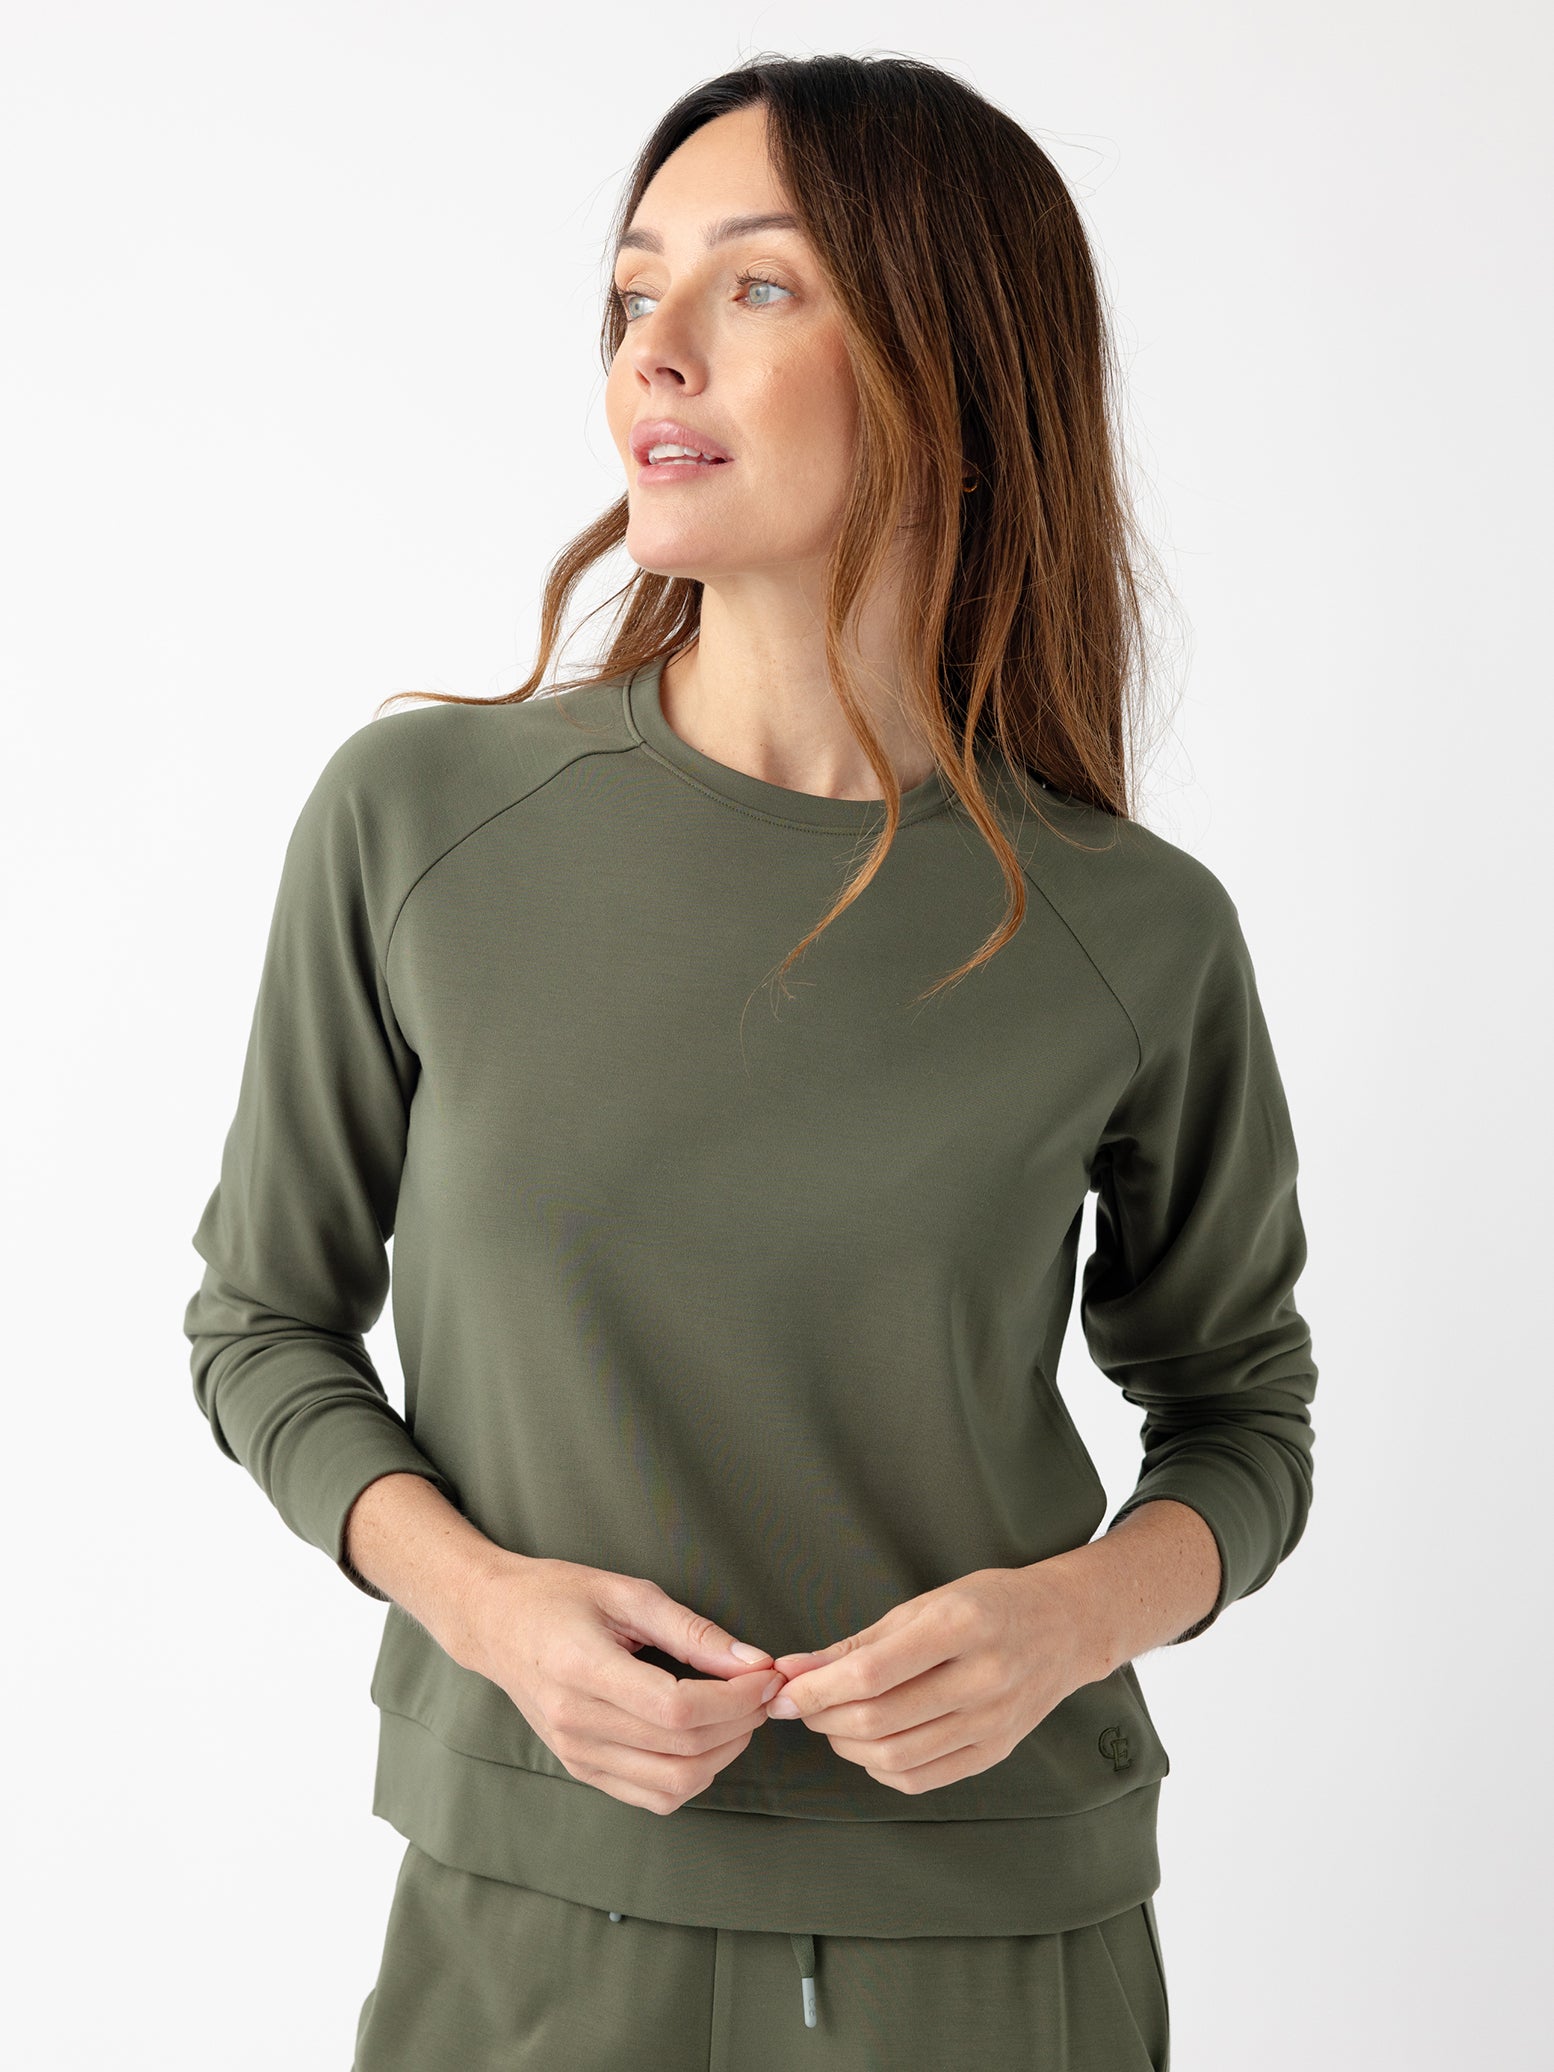 Woman in olive crewneck with white background 